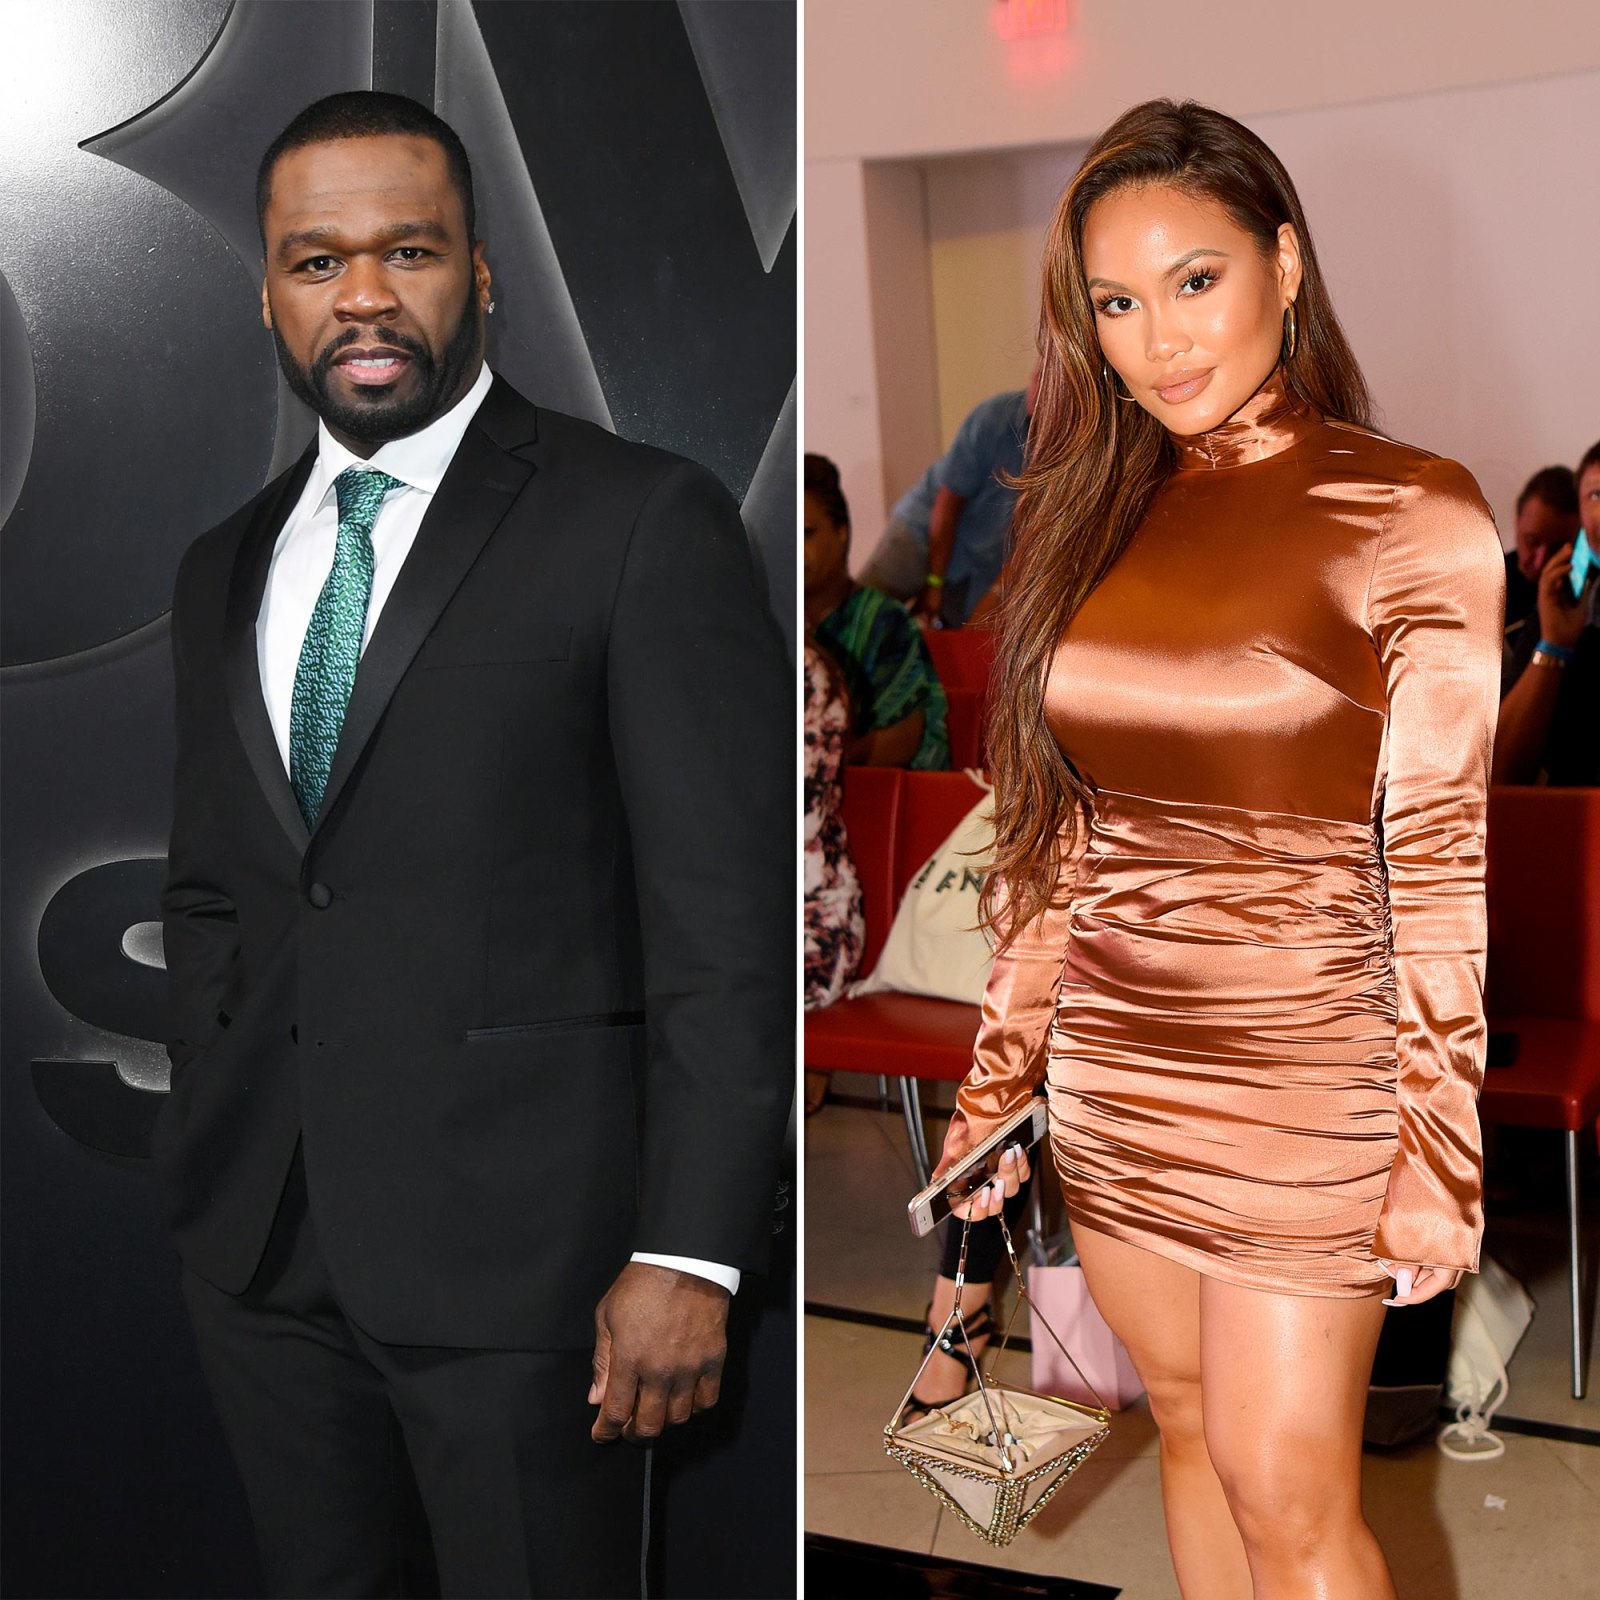 50 Cent Breaks His Silence Following Accusations of Rape and Physical Abuse by Ex Daphne Joy